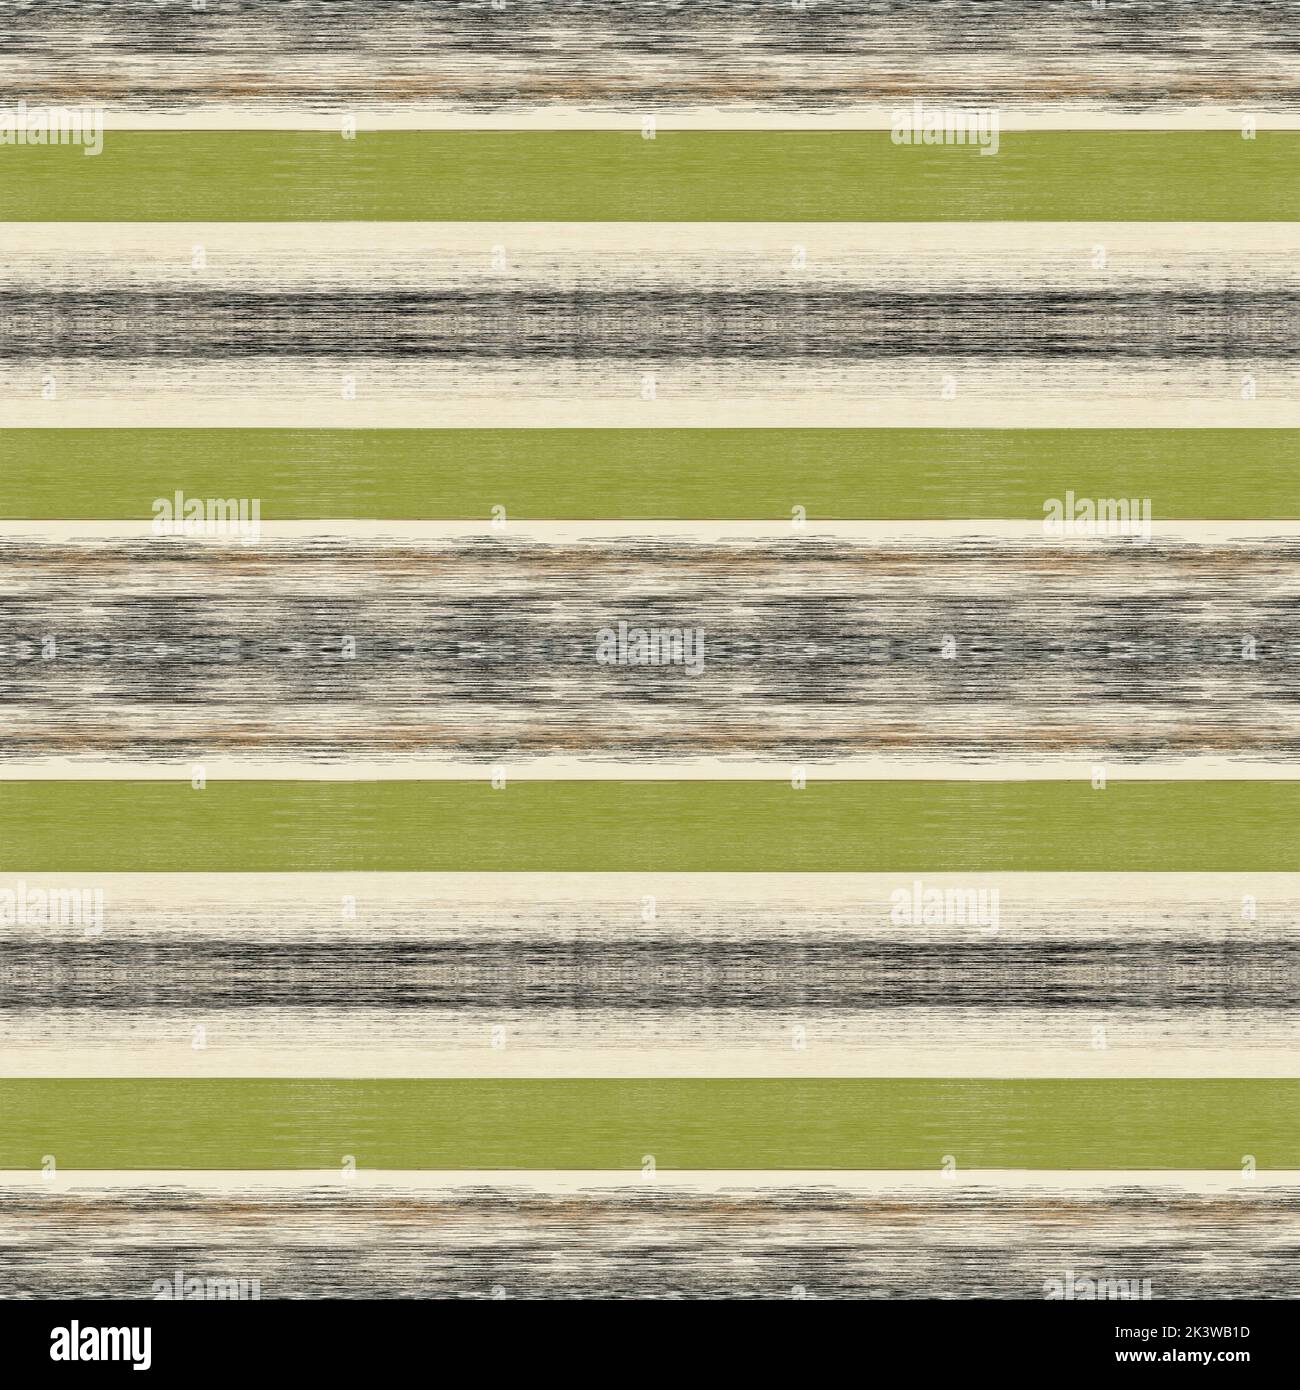 Green forest marl seamless pattern. Textured woodland weave for